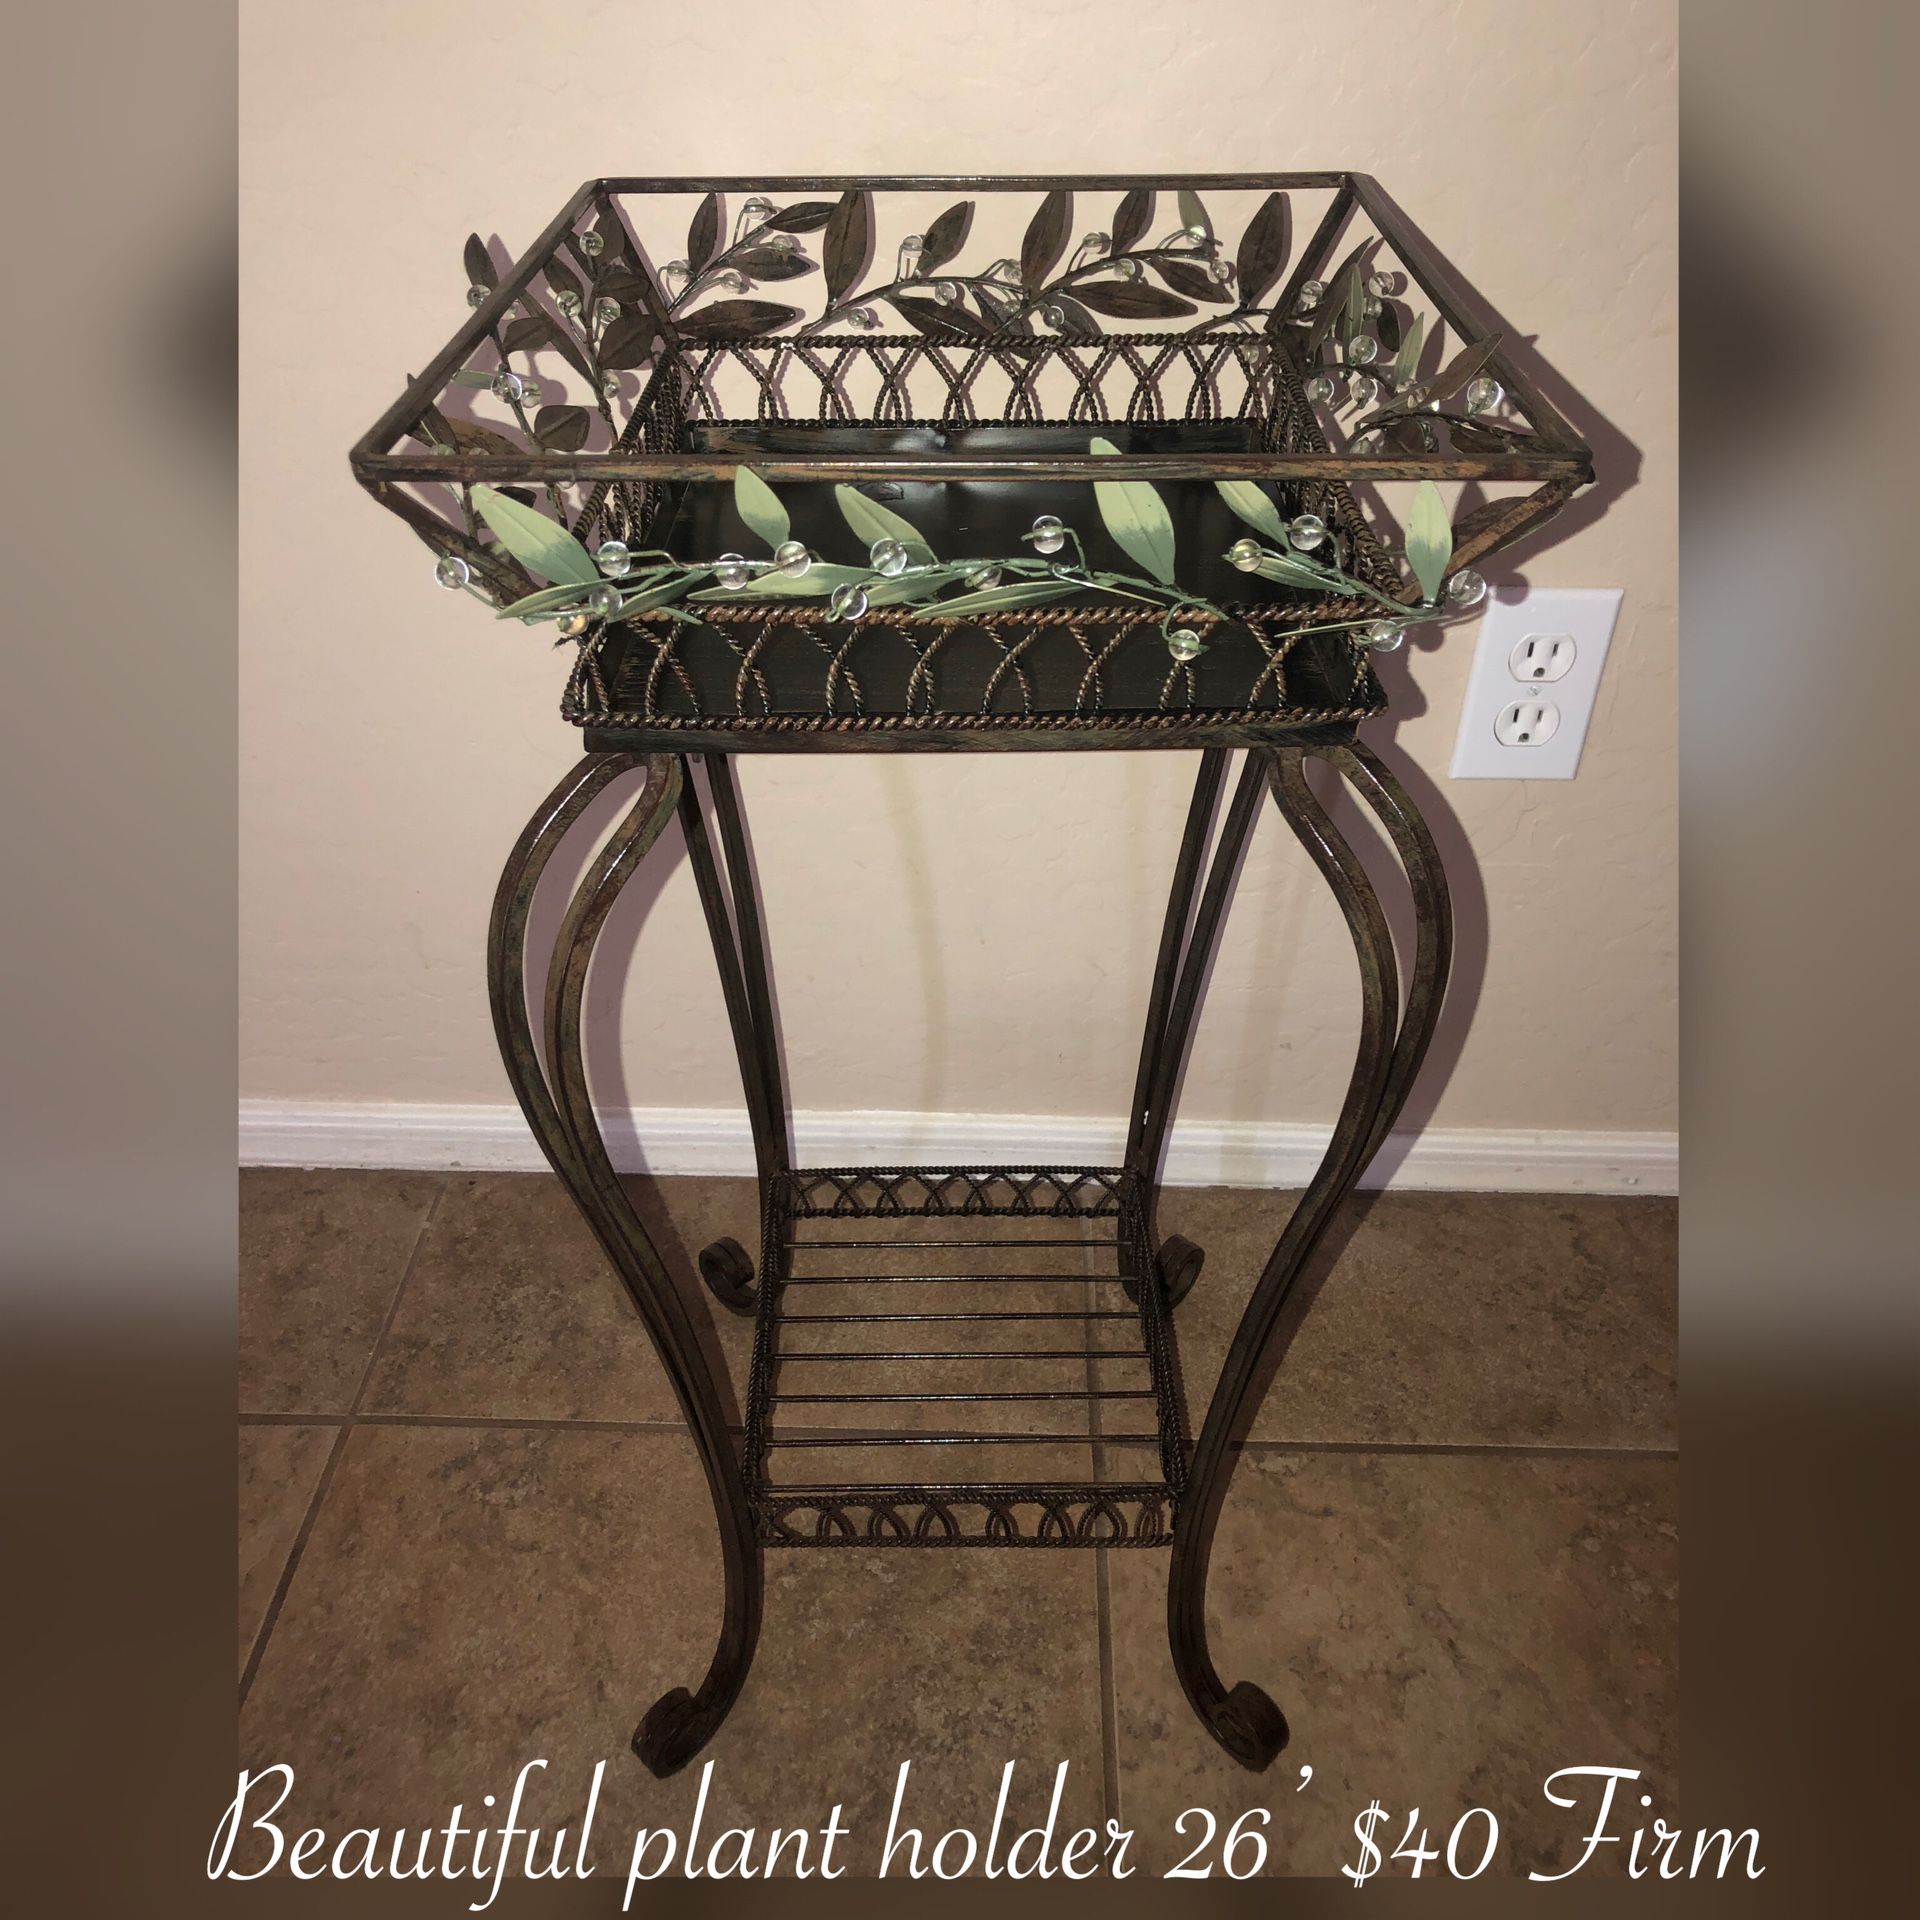 New beautiful plant holder $35 Firm